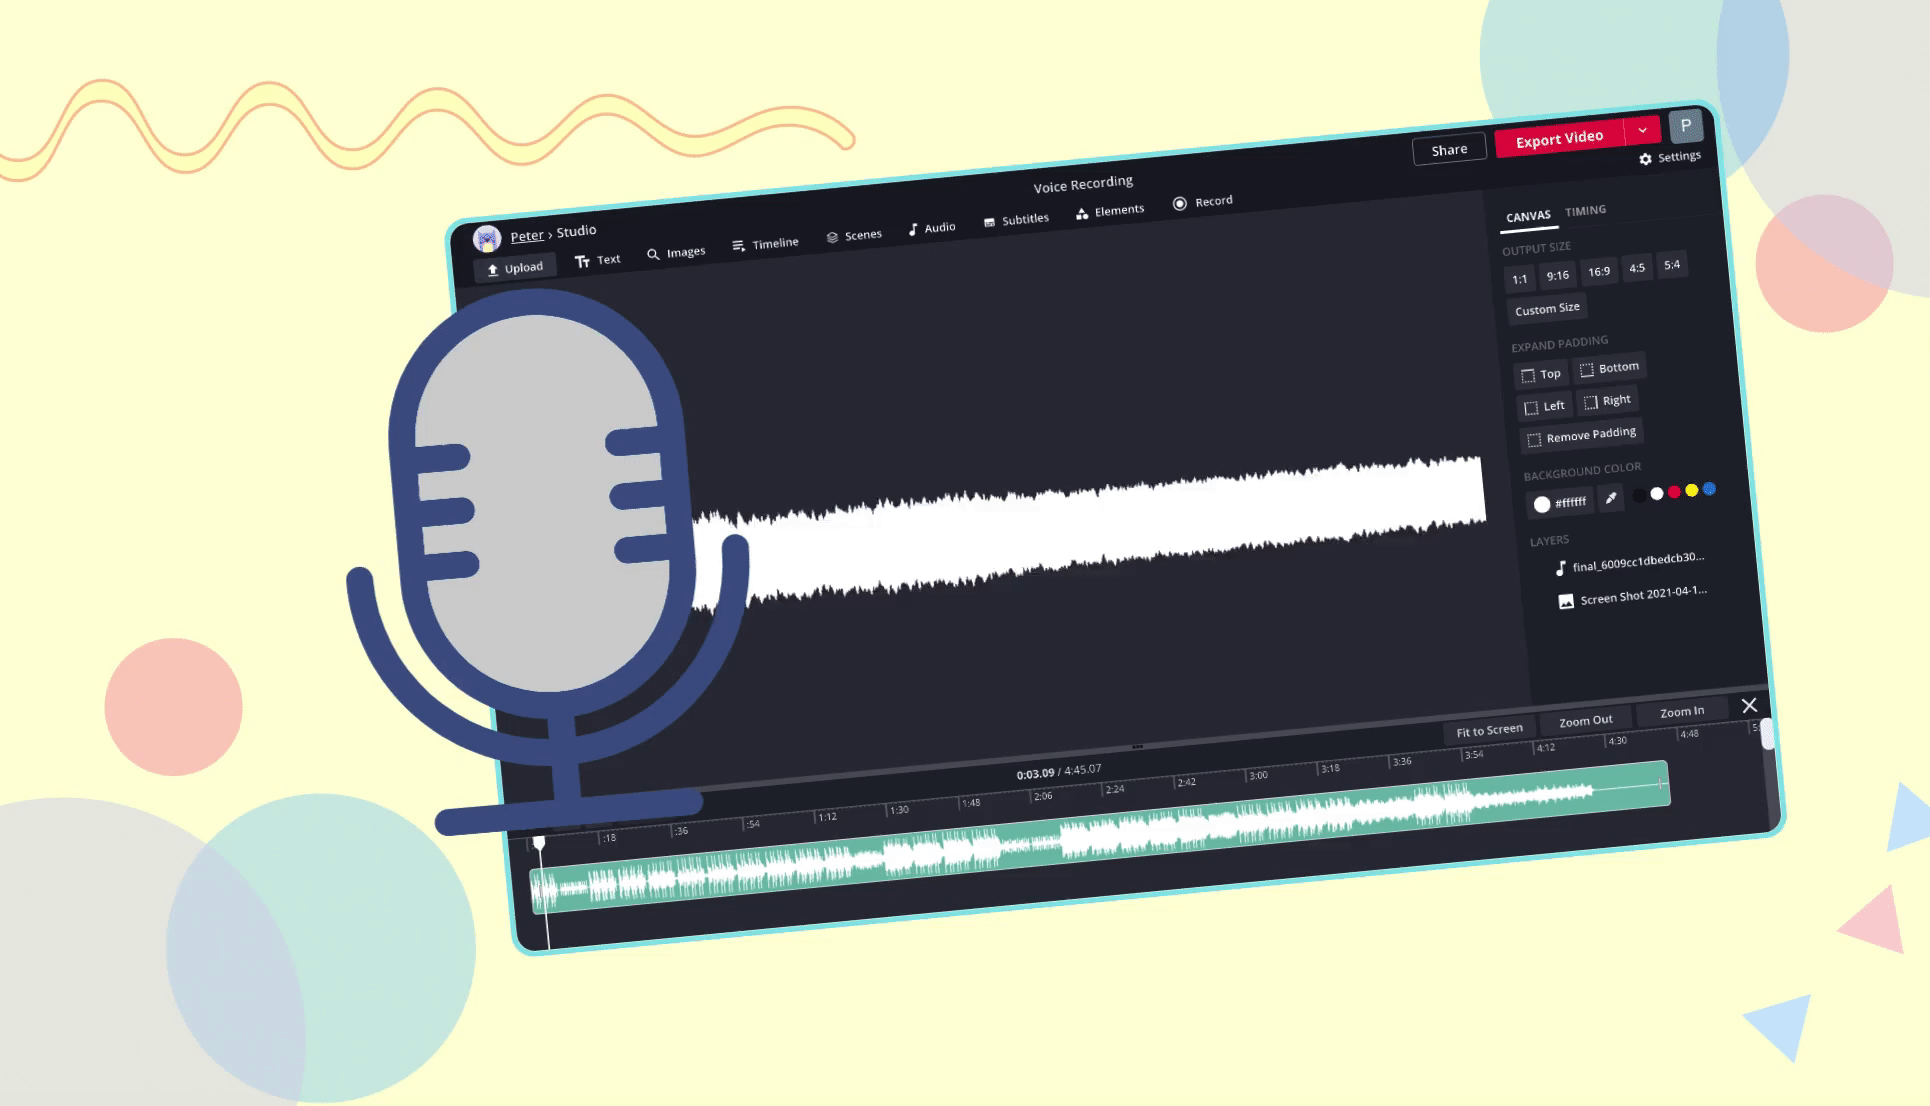 Online Voice Recorder: Create, Save, and Share Audio for Free